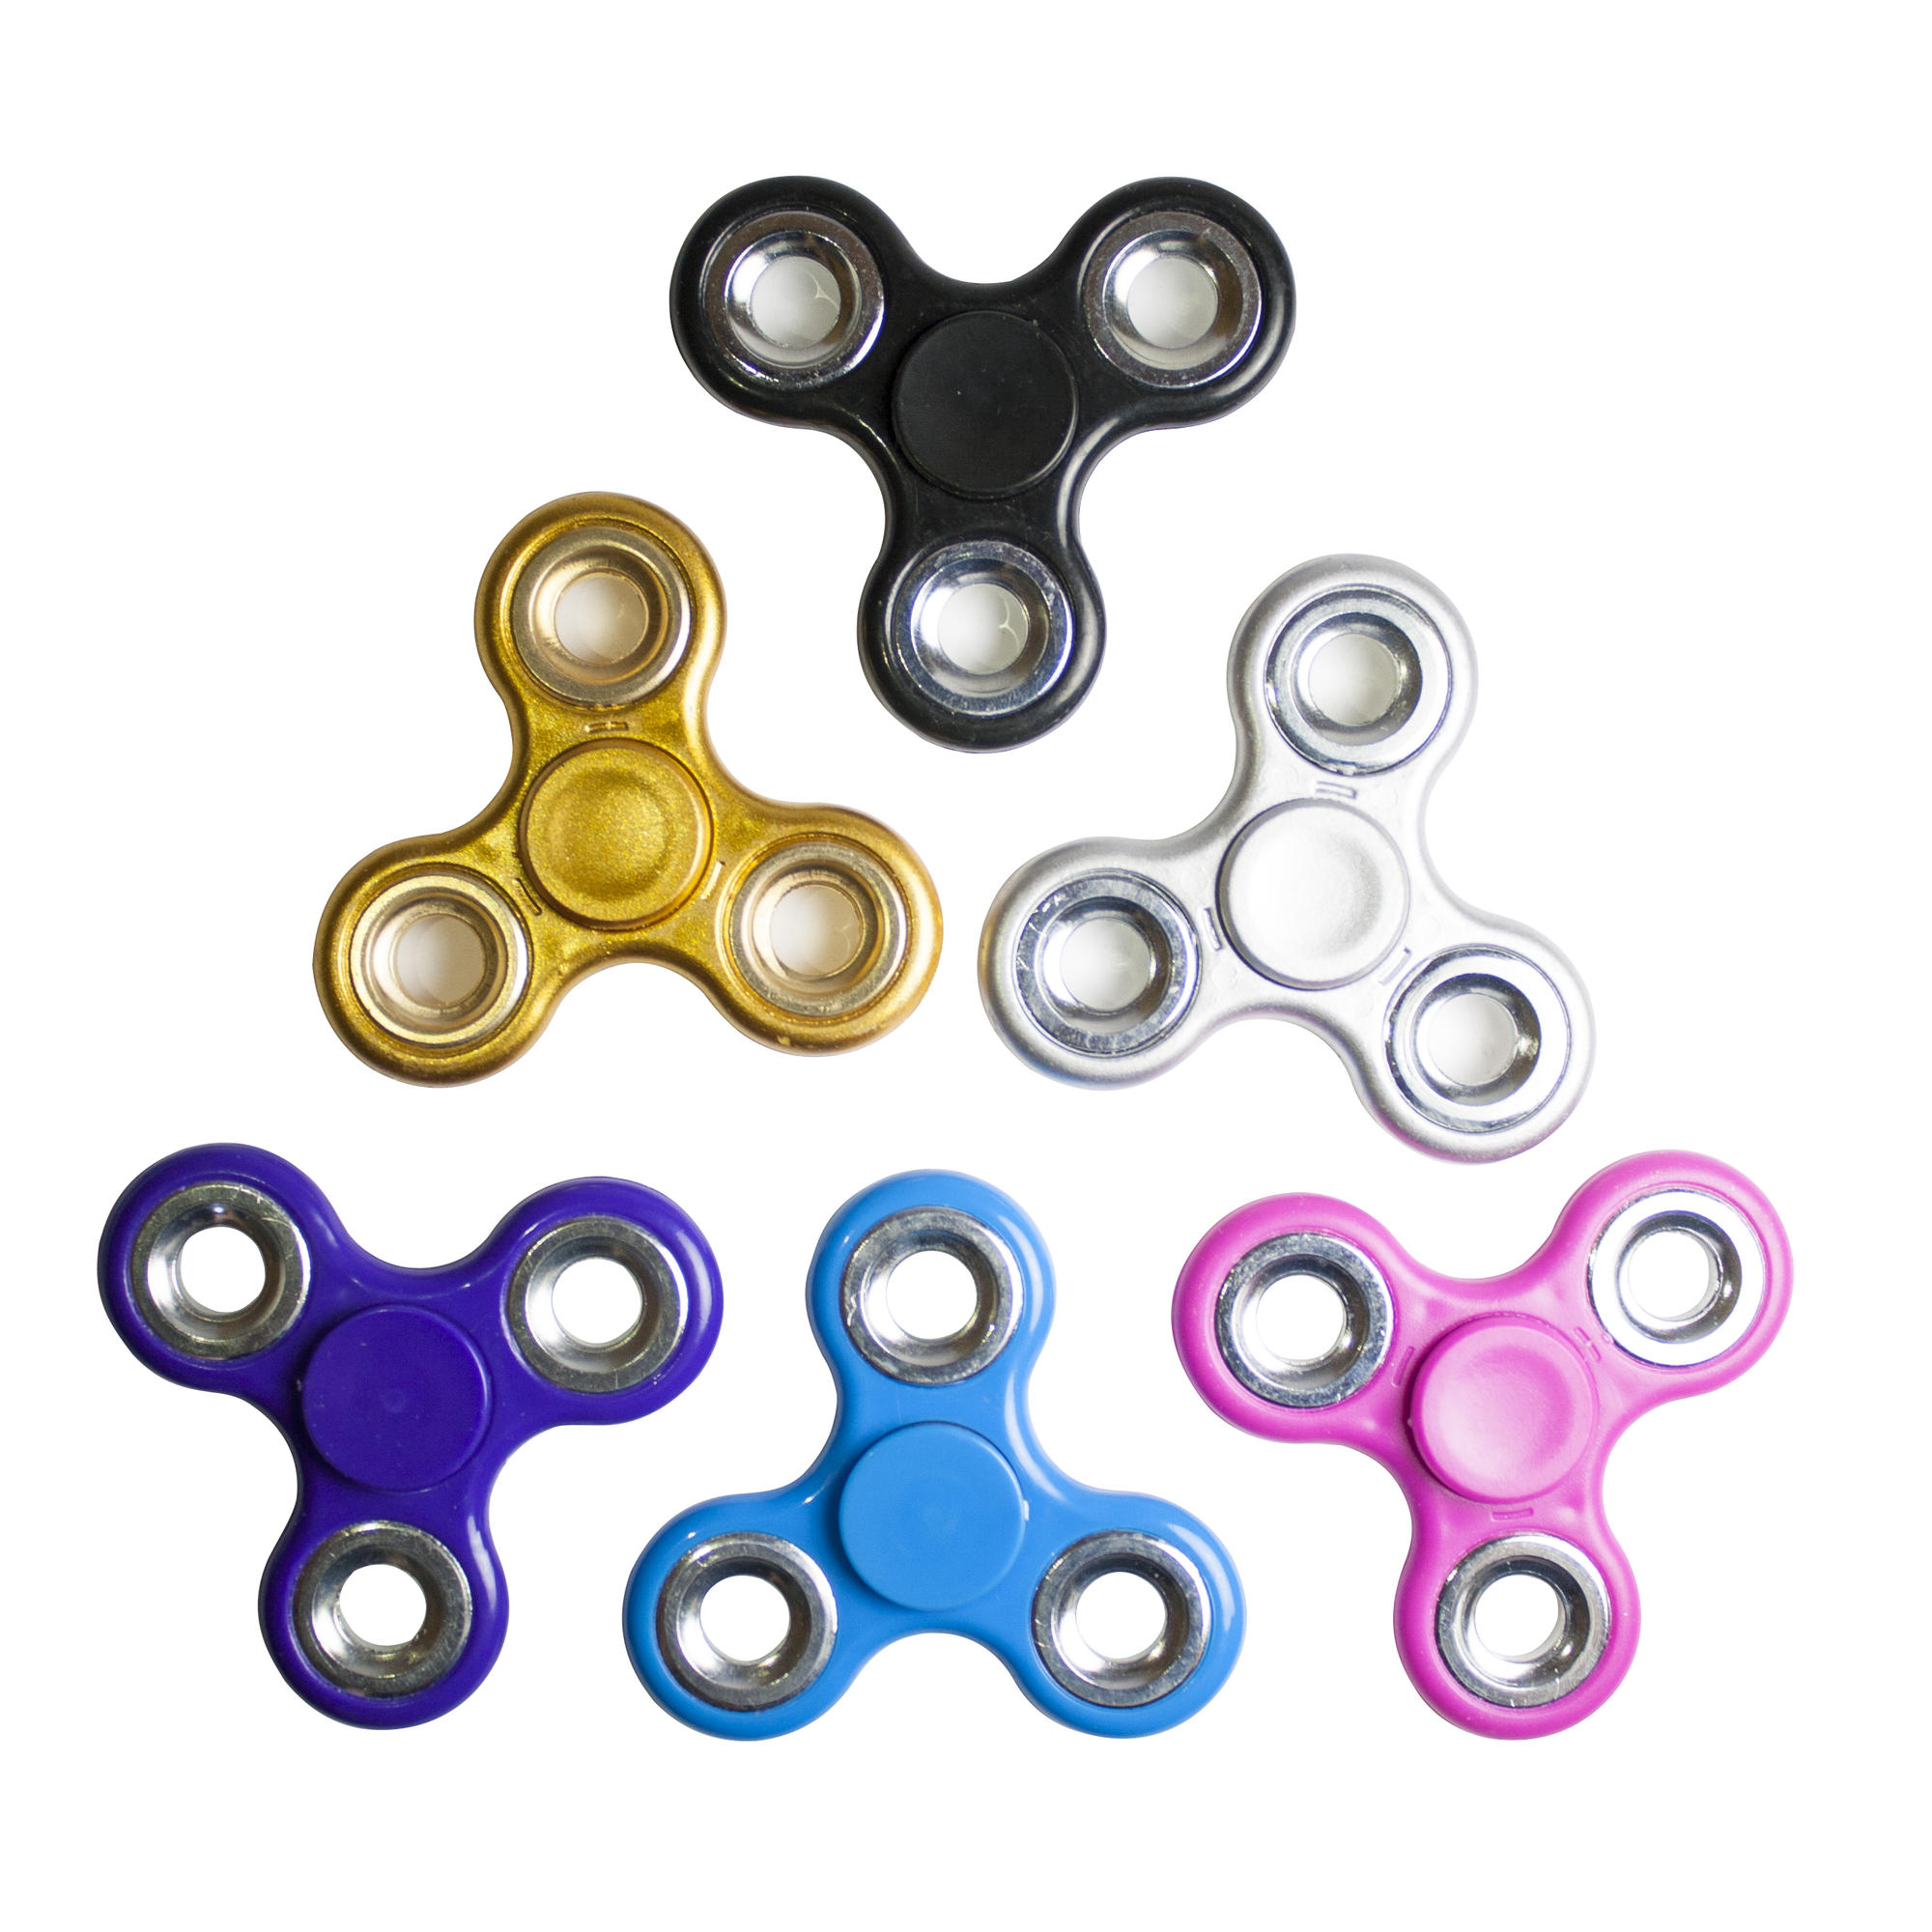 Focus Fidget Spinner Stress and Anxiety Reliever Toy